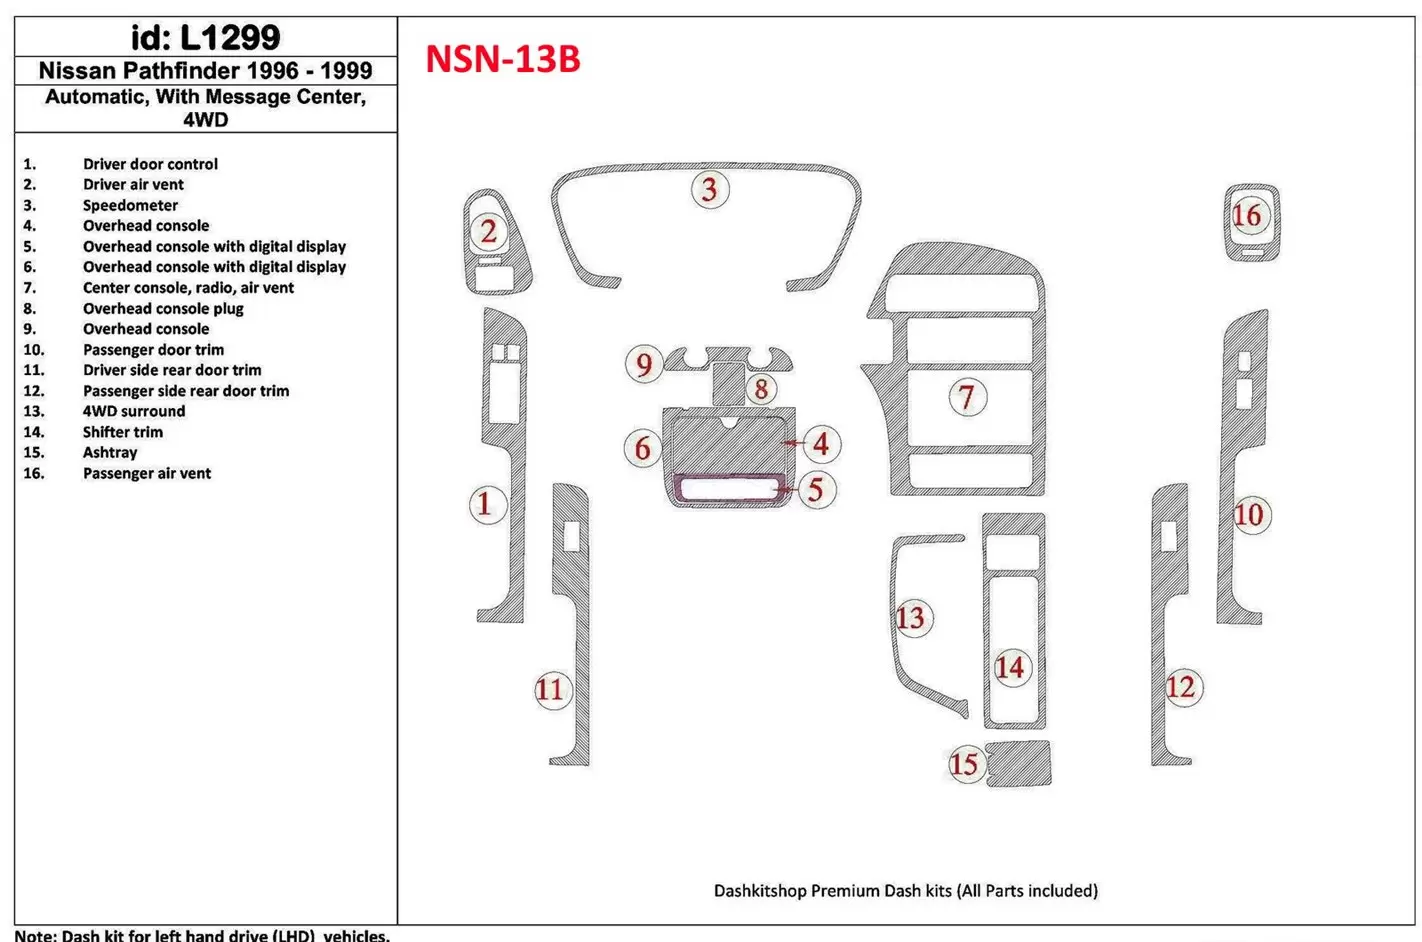 Nissan Pathfinder 1996-1999 Automatic Gearbox, With Message Center, 4WD, 16 Parts set Cruscotto BD Rivestimenti interni